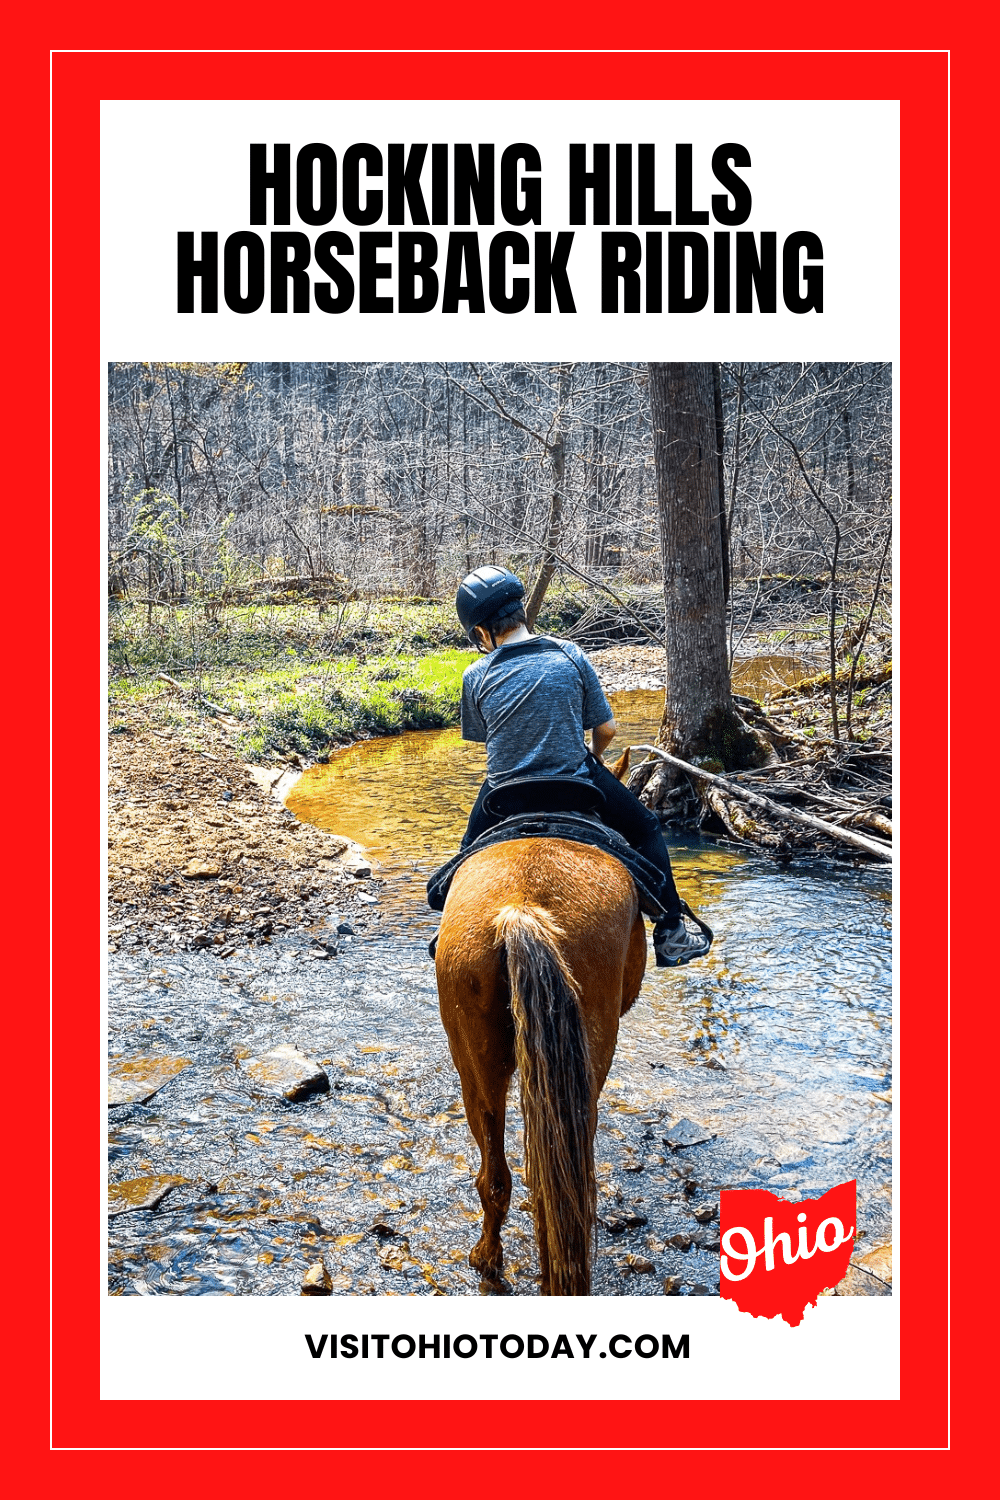 vertical image with a photo of the back view of a boy on a horse crossing some shallow water. A white box at the top contains the text Hocking Hills Horseback Riding